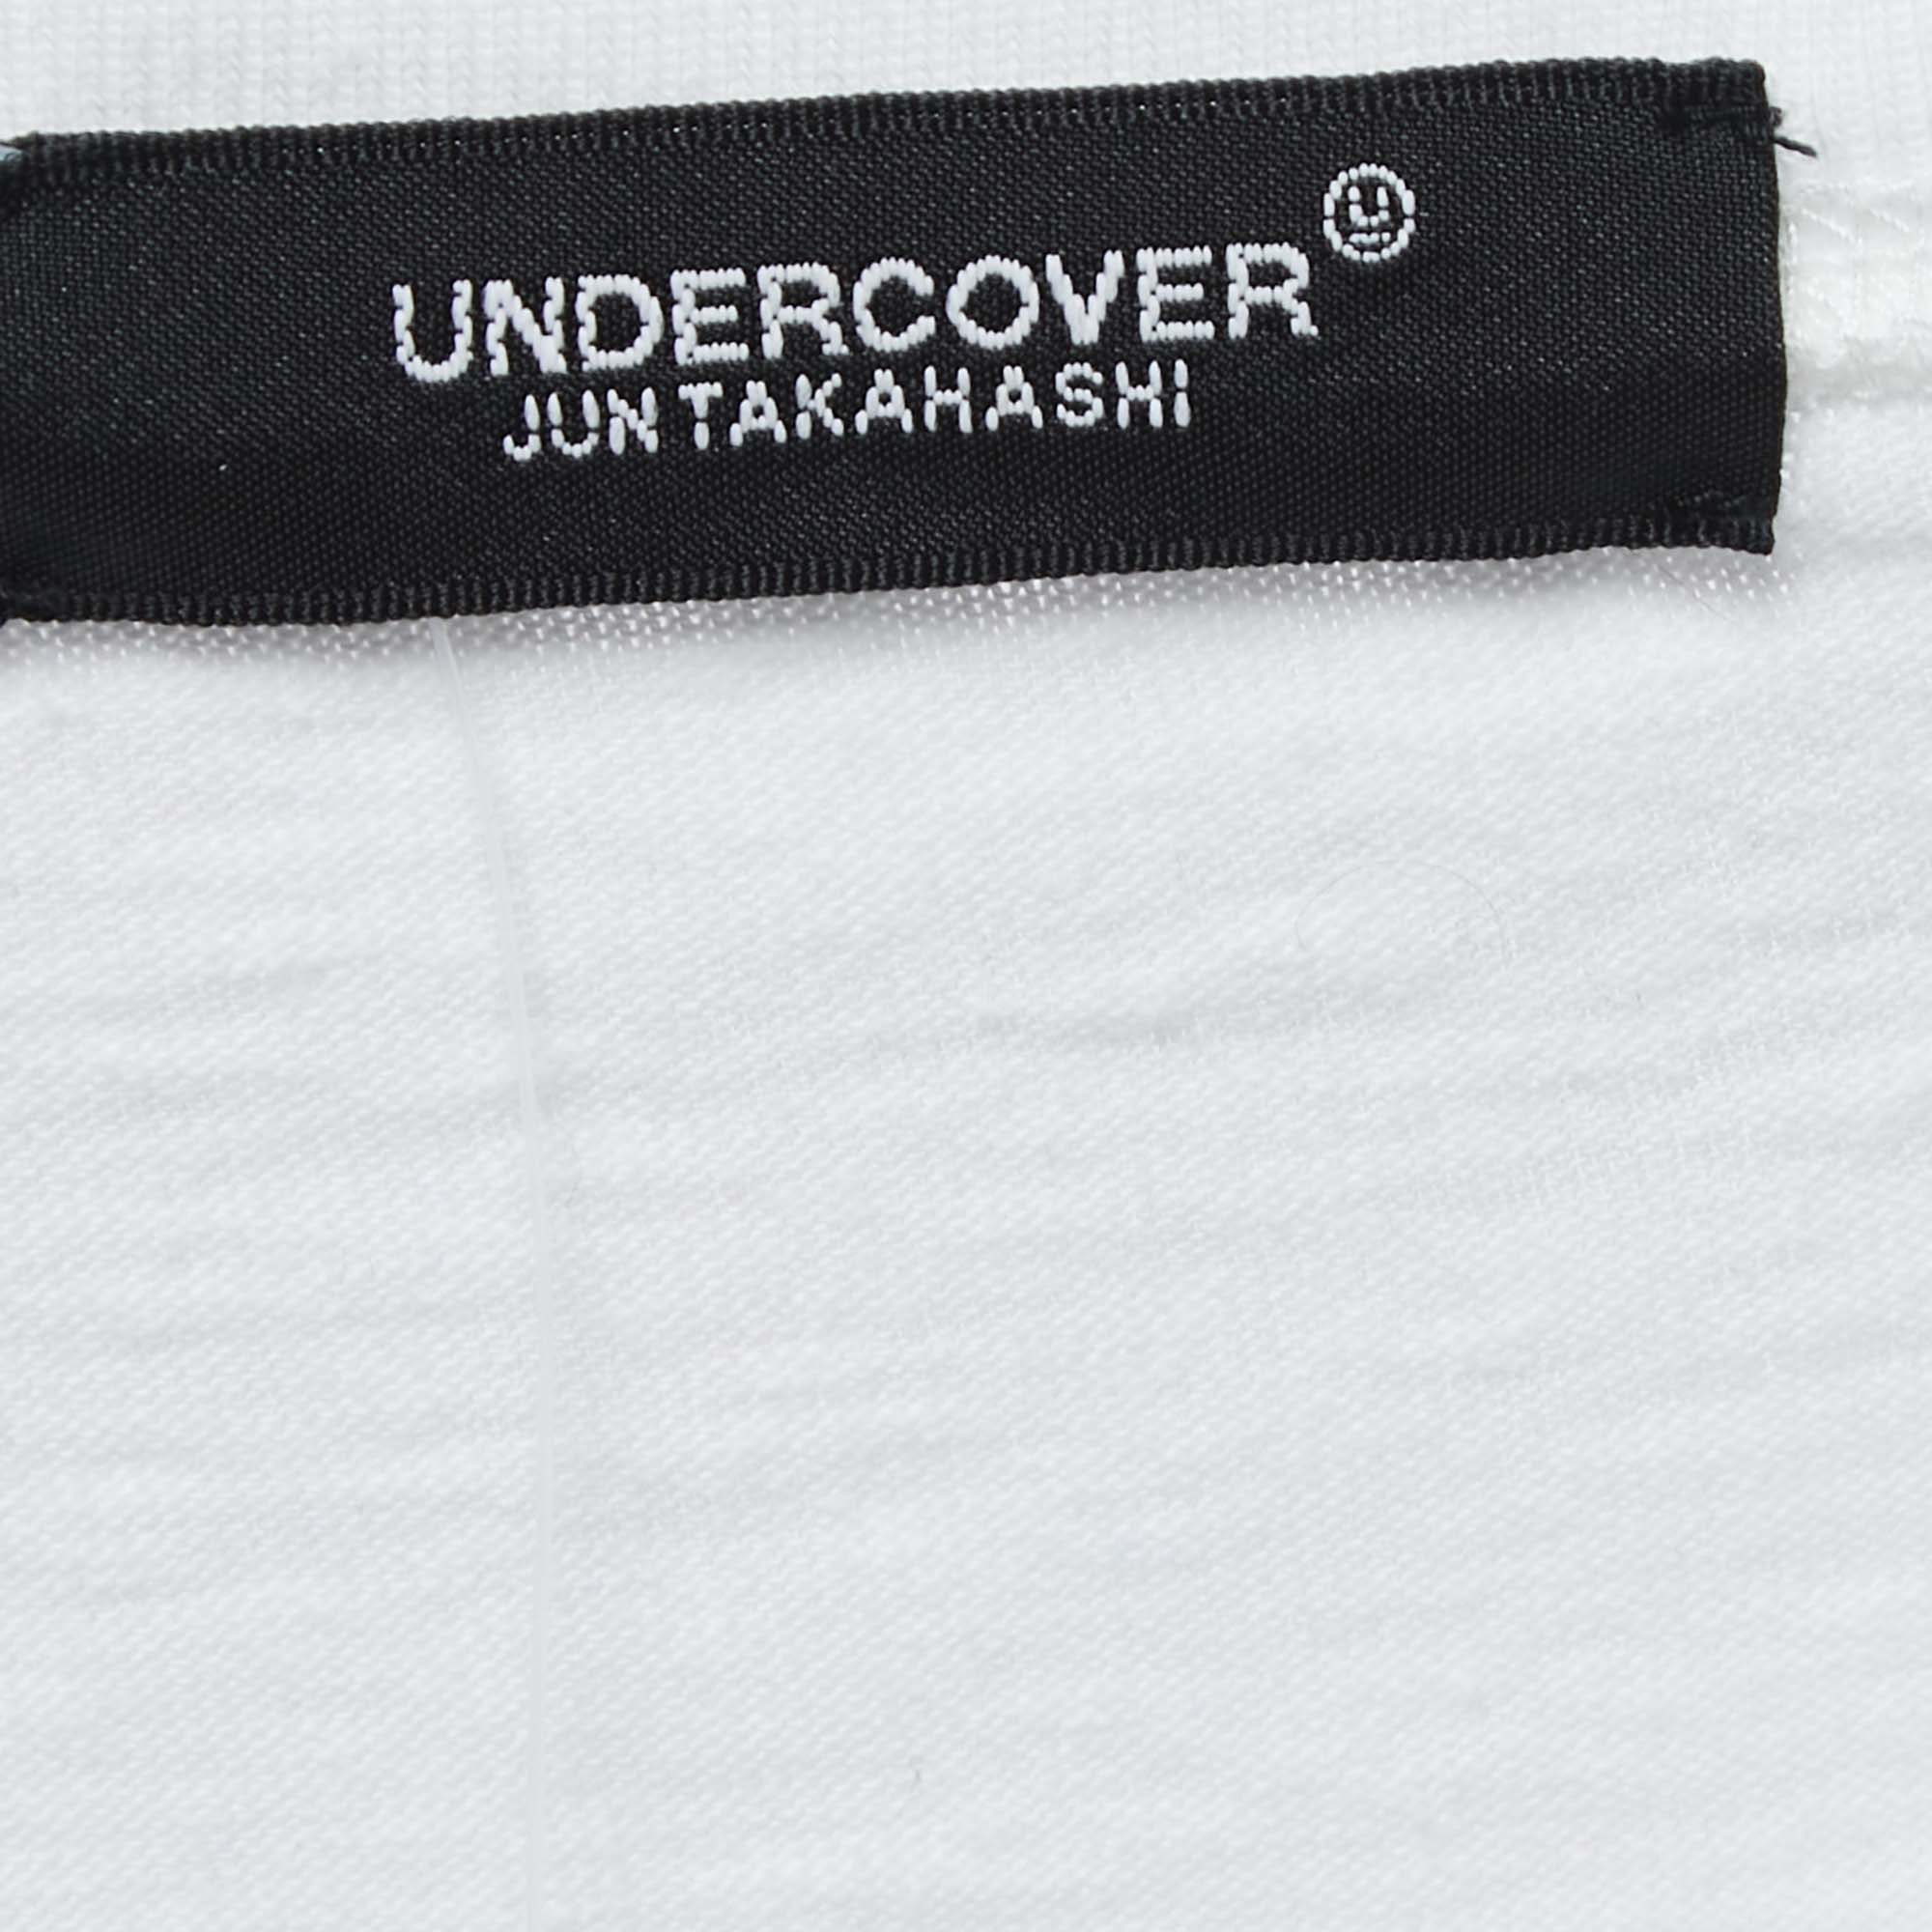 Undercover White Printed Cotton Crew Neck Half Sleeve T-Shirt One Size